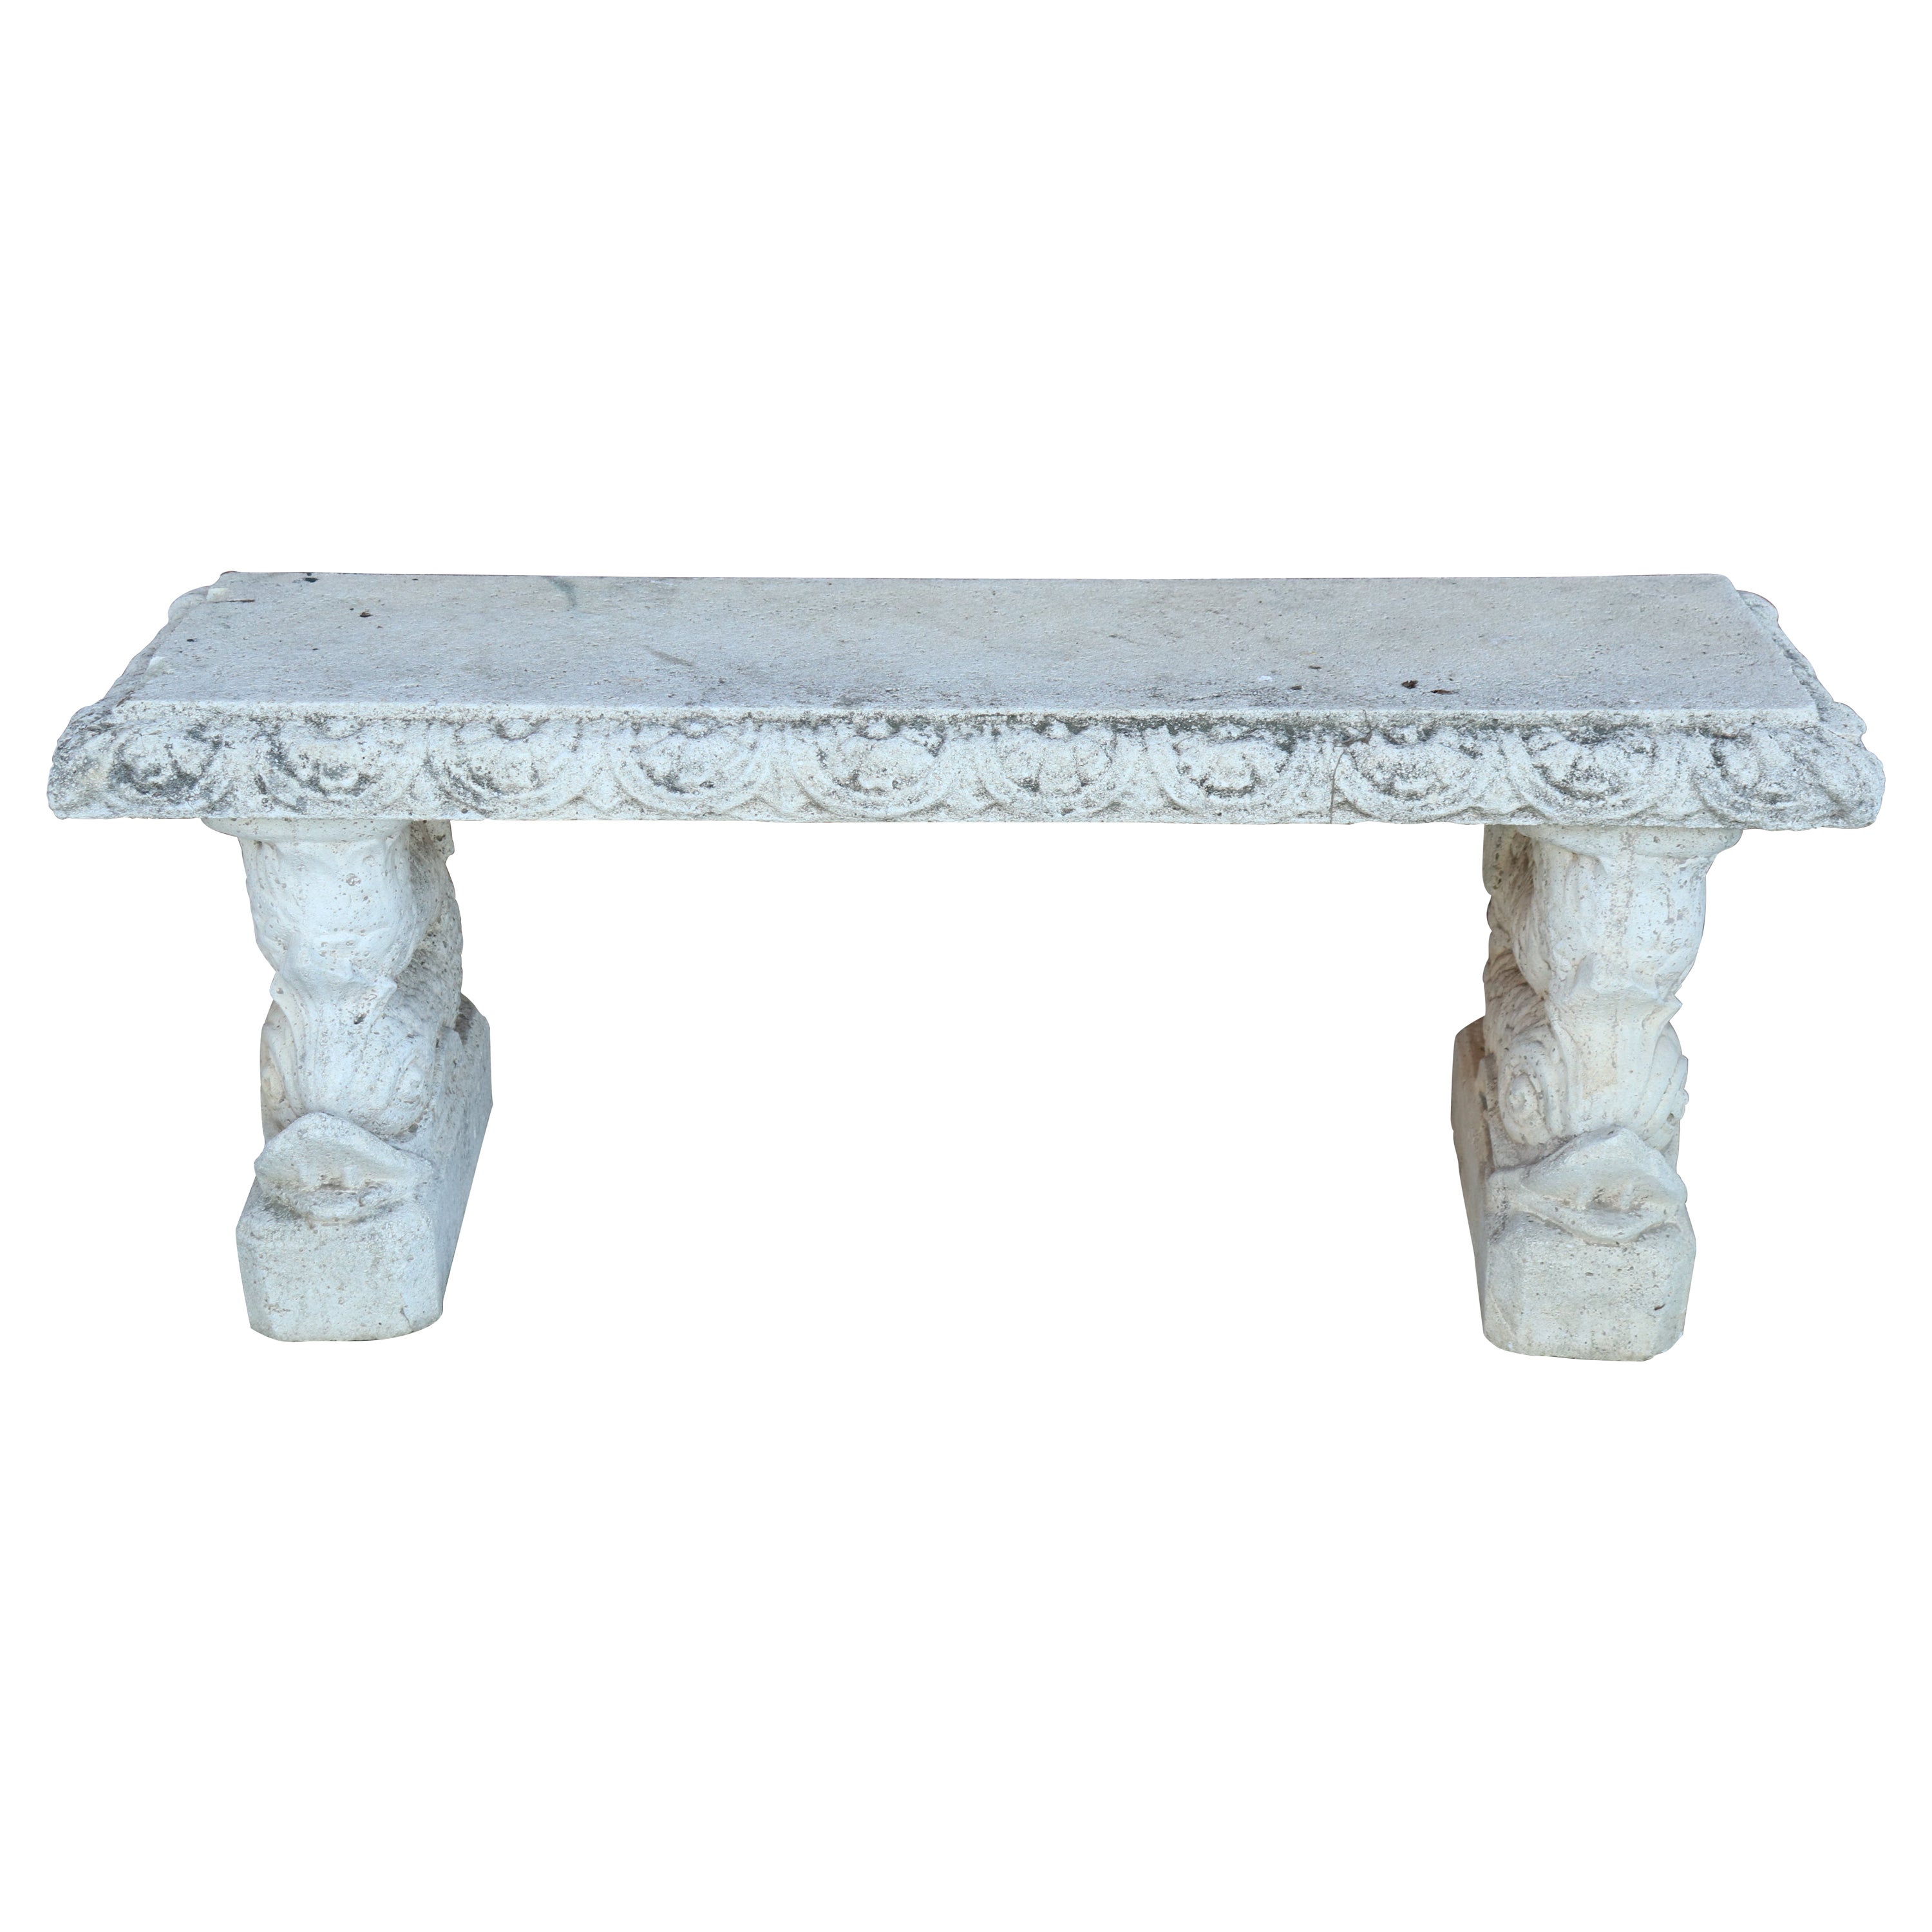 Early 20th Century Italian Charles X Style Outdoor and Garden Bench